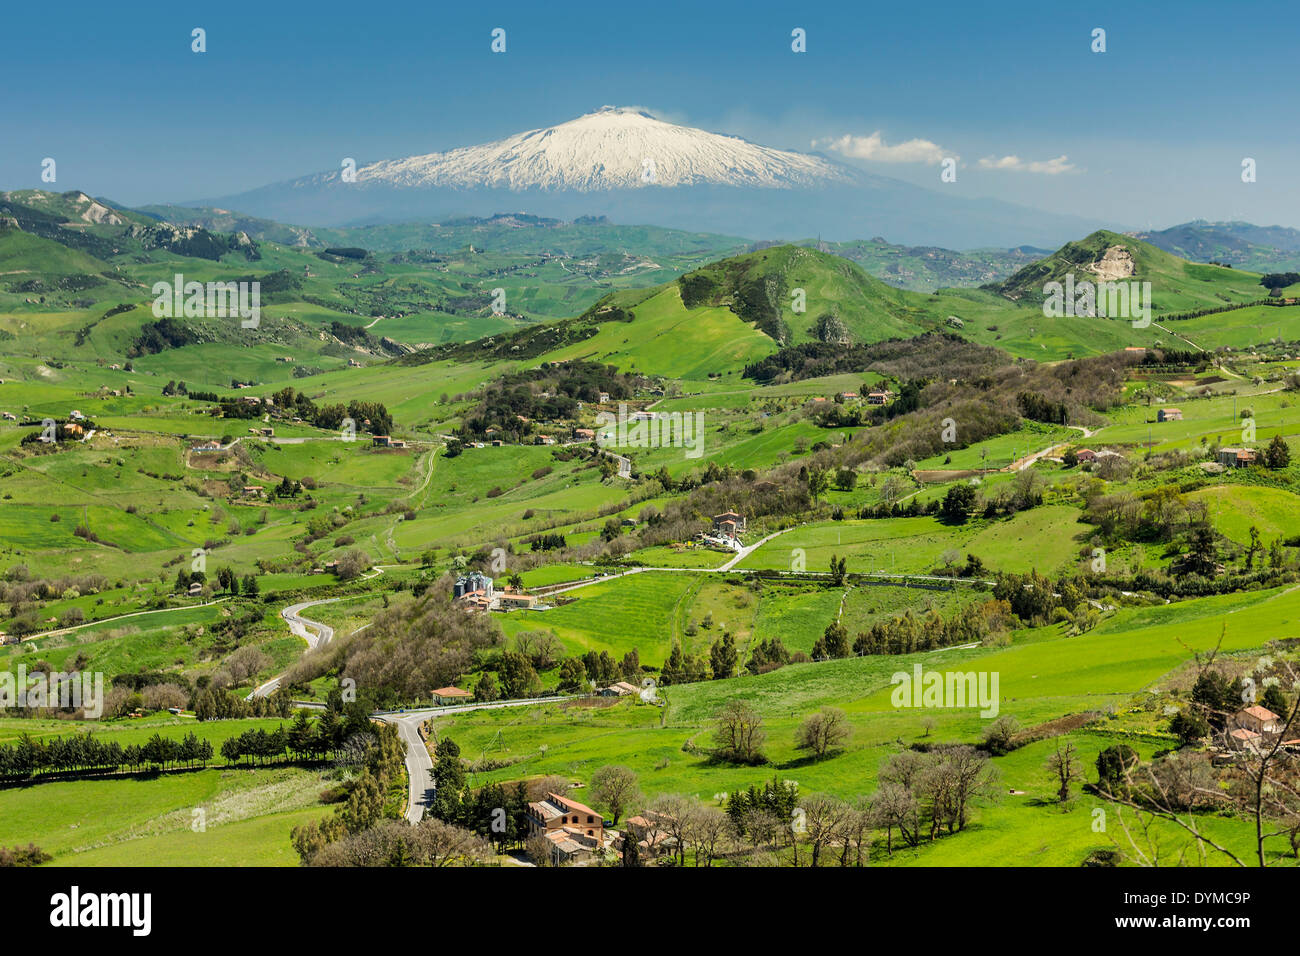 View to snow covered volcano Mount Etna from this central hill town in Spring; Gangi, Palermo Province, Sicily, Italy Stock Photo